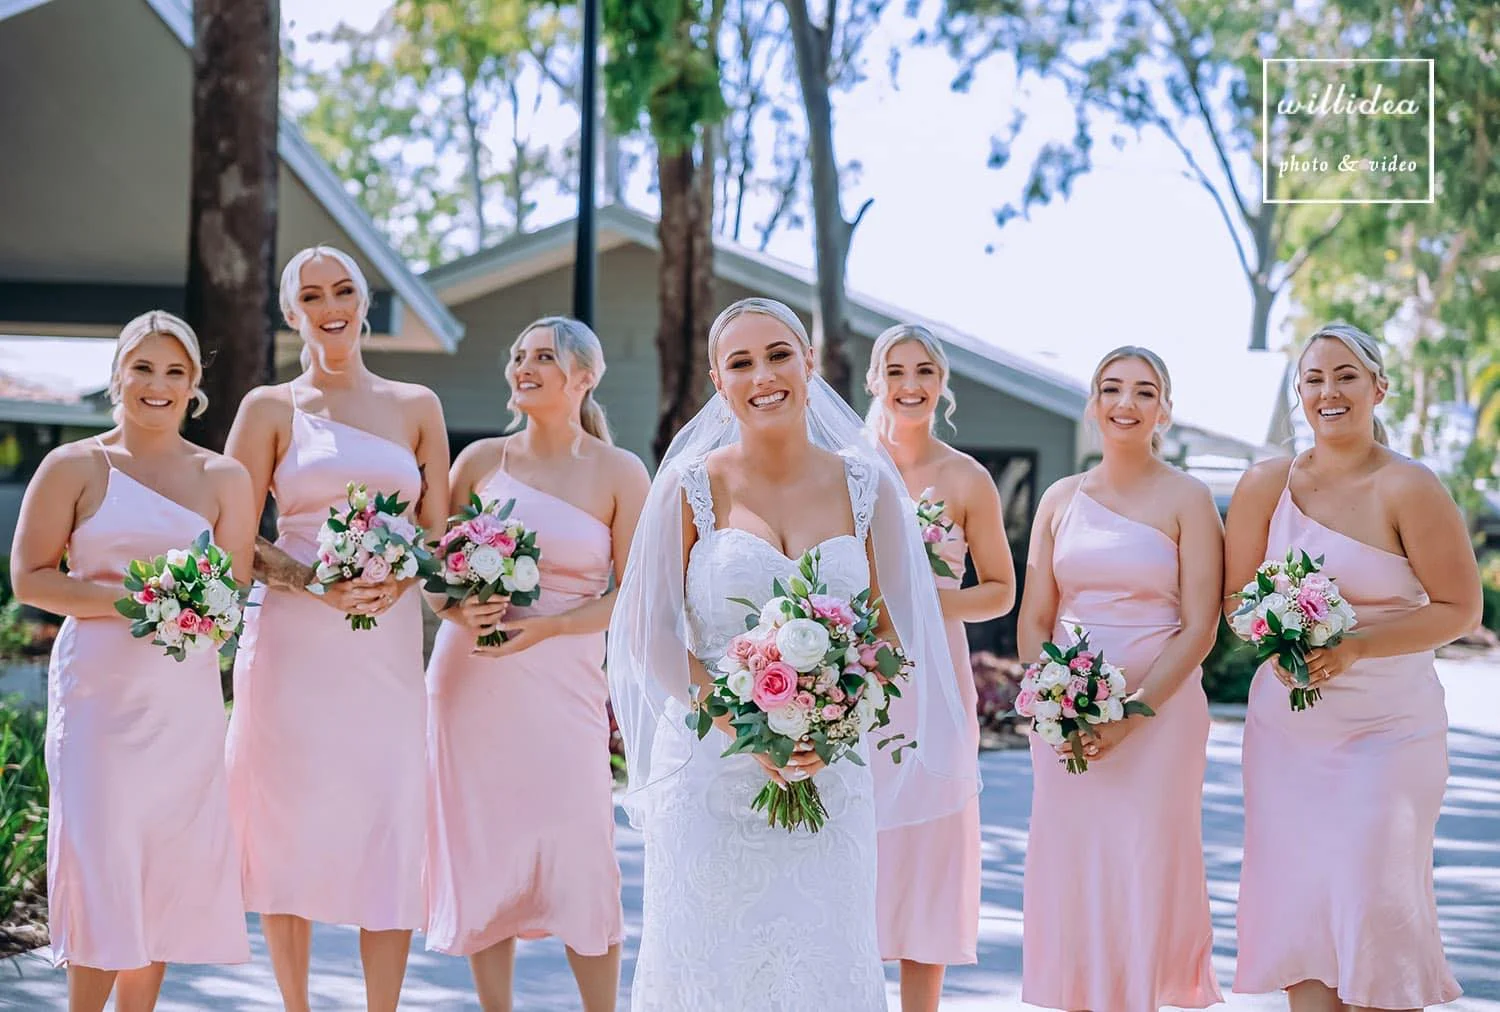 best-wedding-flowers-and-bouquets-queensland-jstems-photo-willidea-photo-and-video